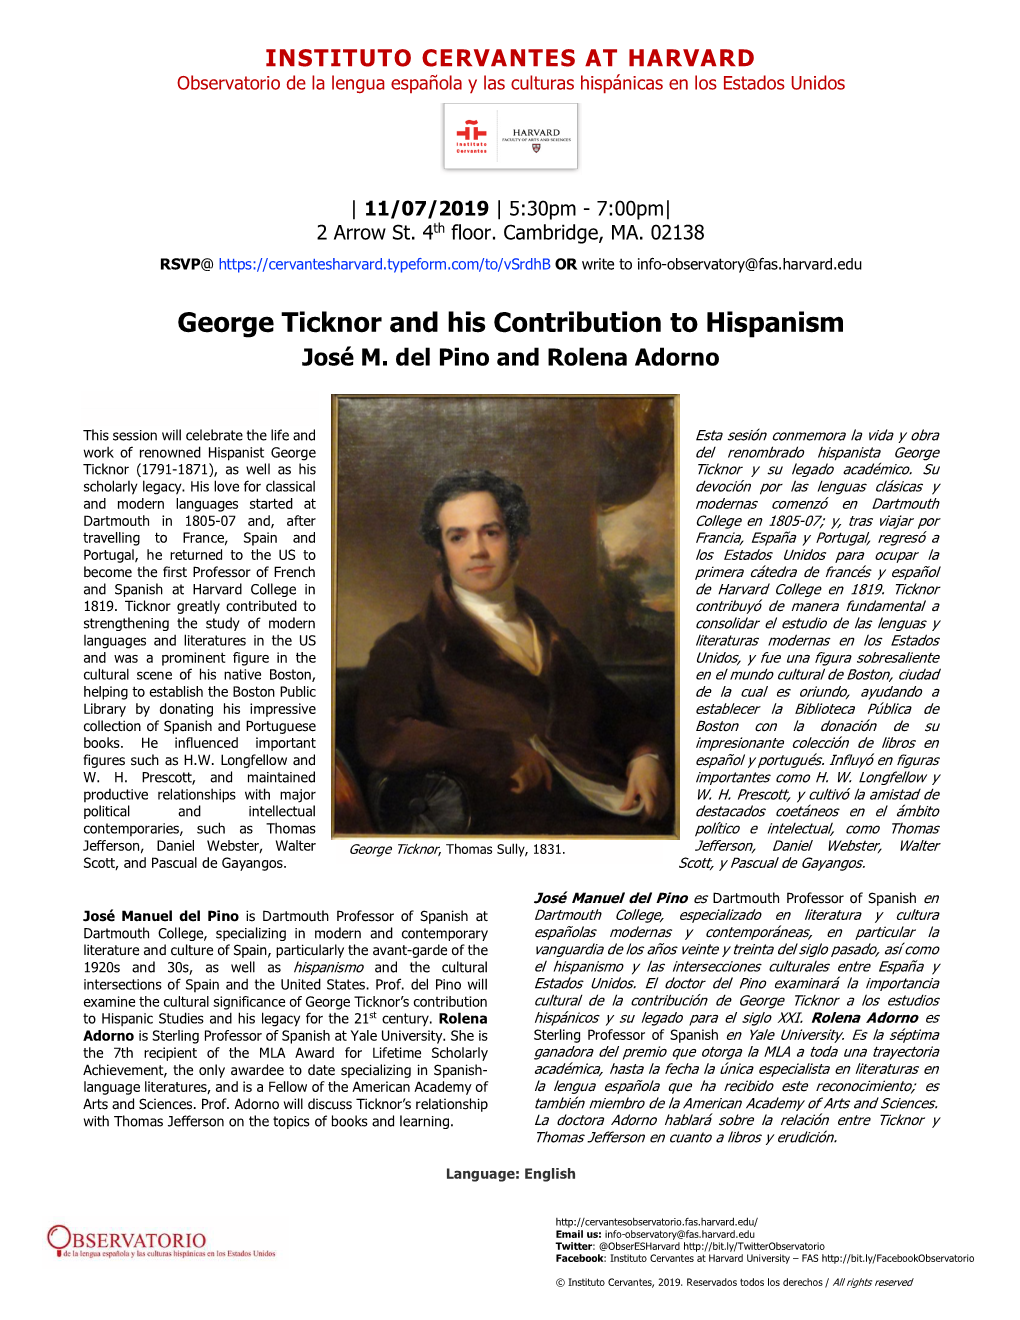 George Ticknor and His Contribution to Hispanism José M